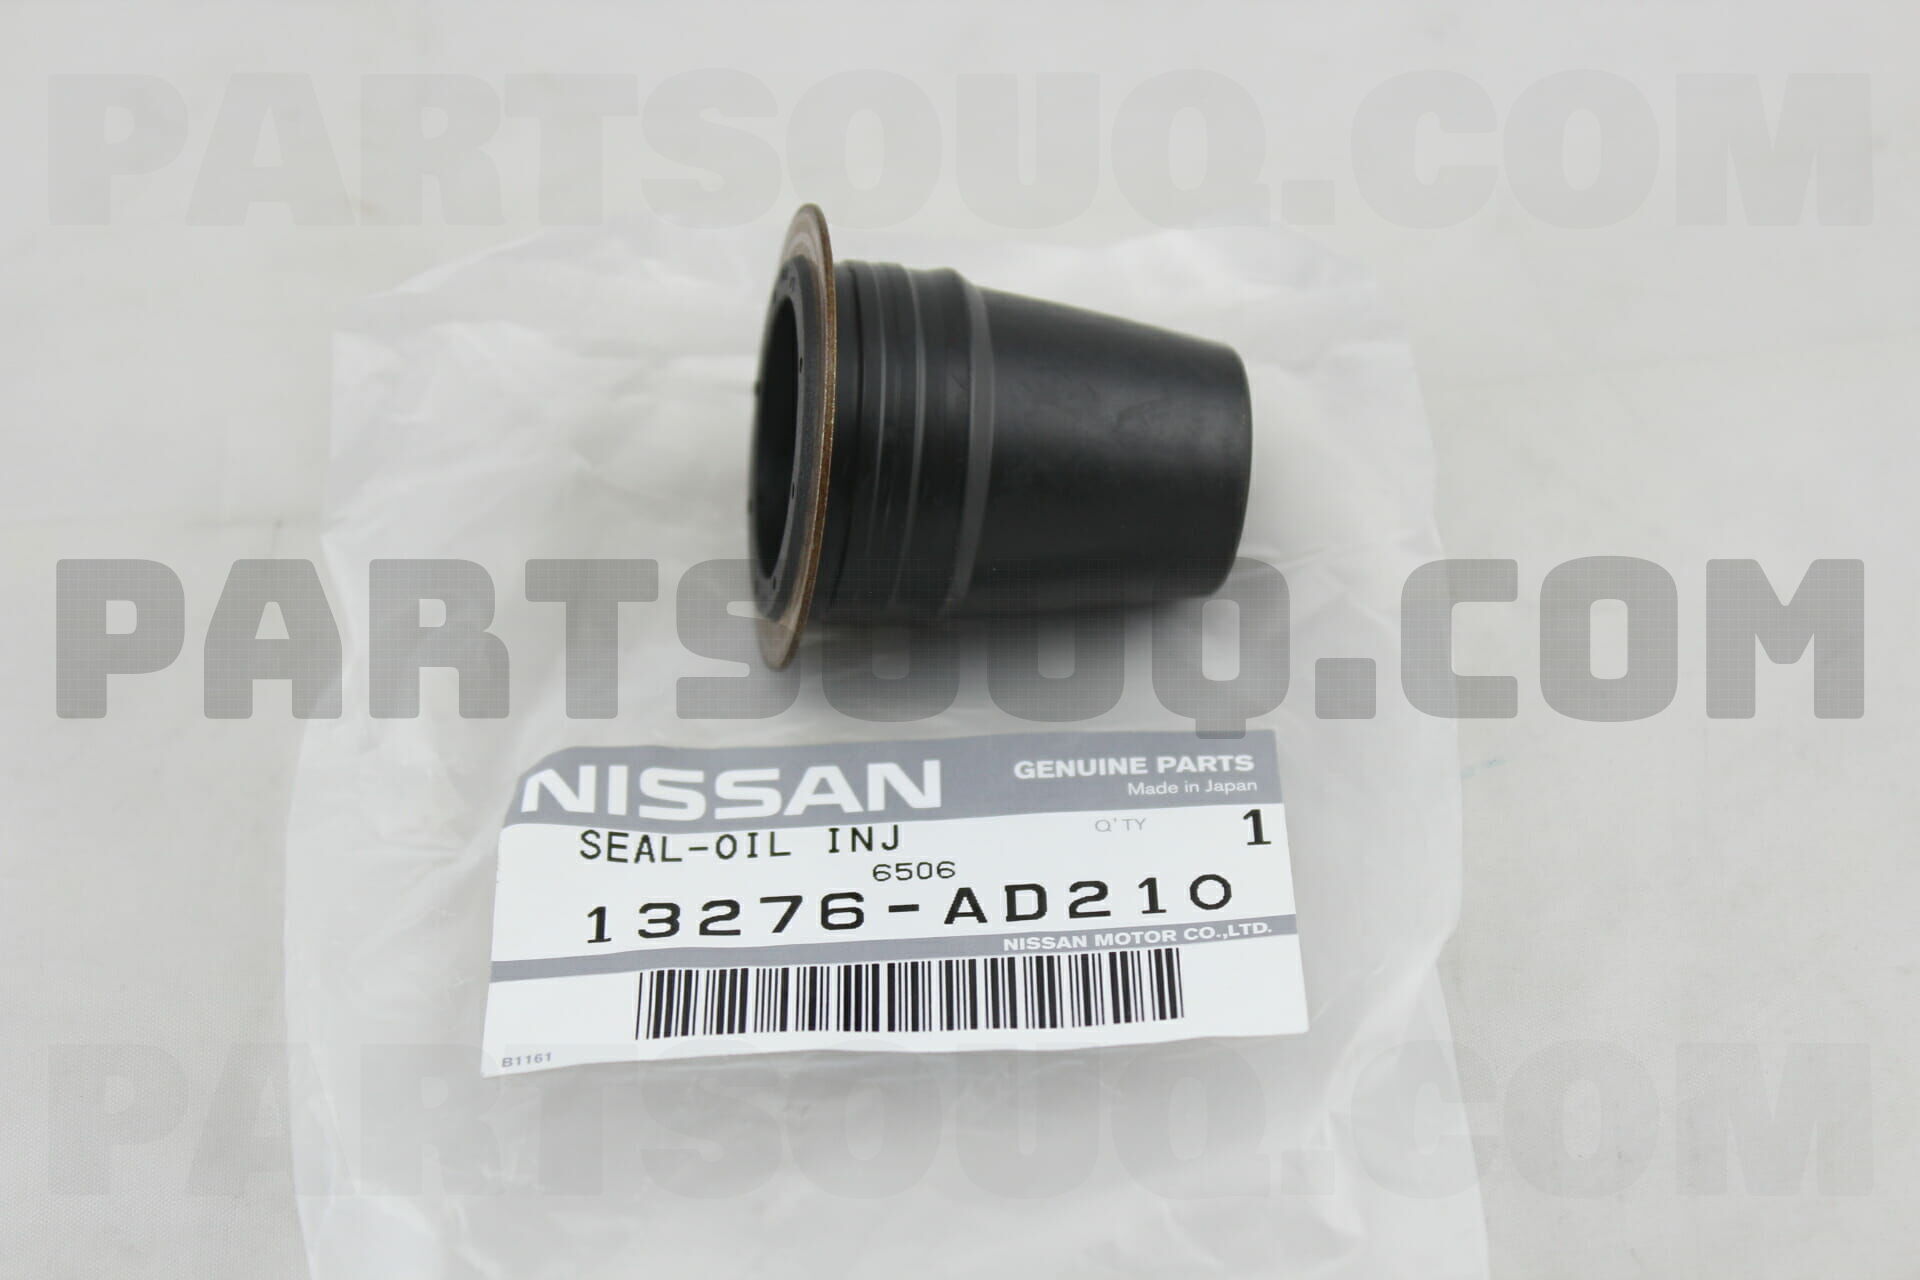 13276AD210 Nissan SEAL-OIL,INJECTION NOZZLE